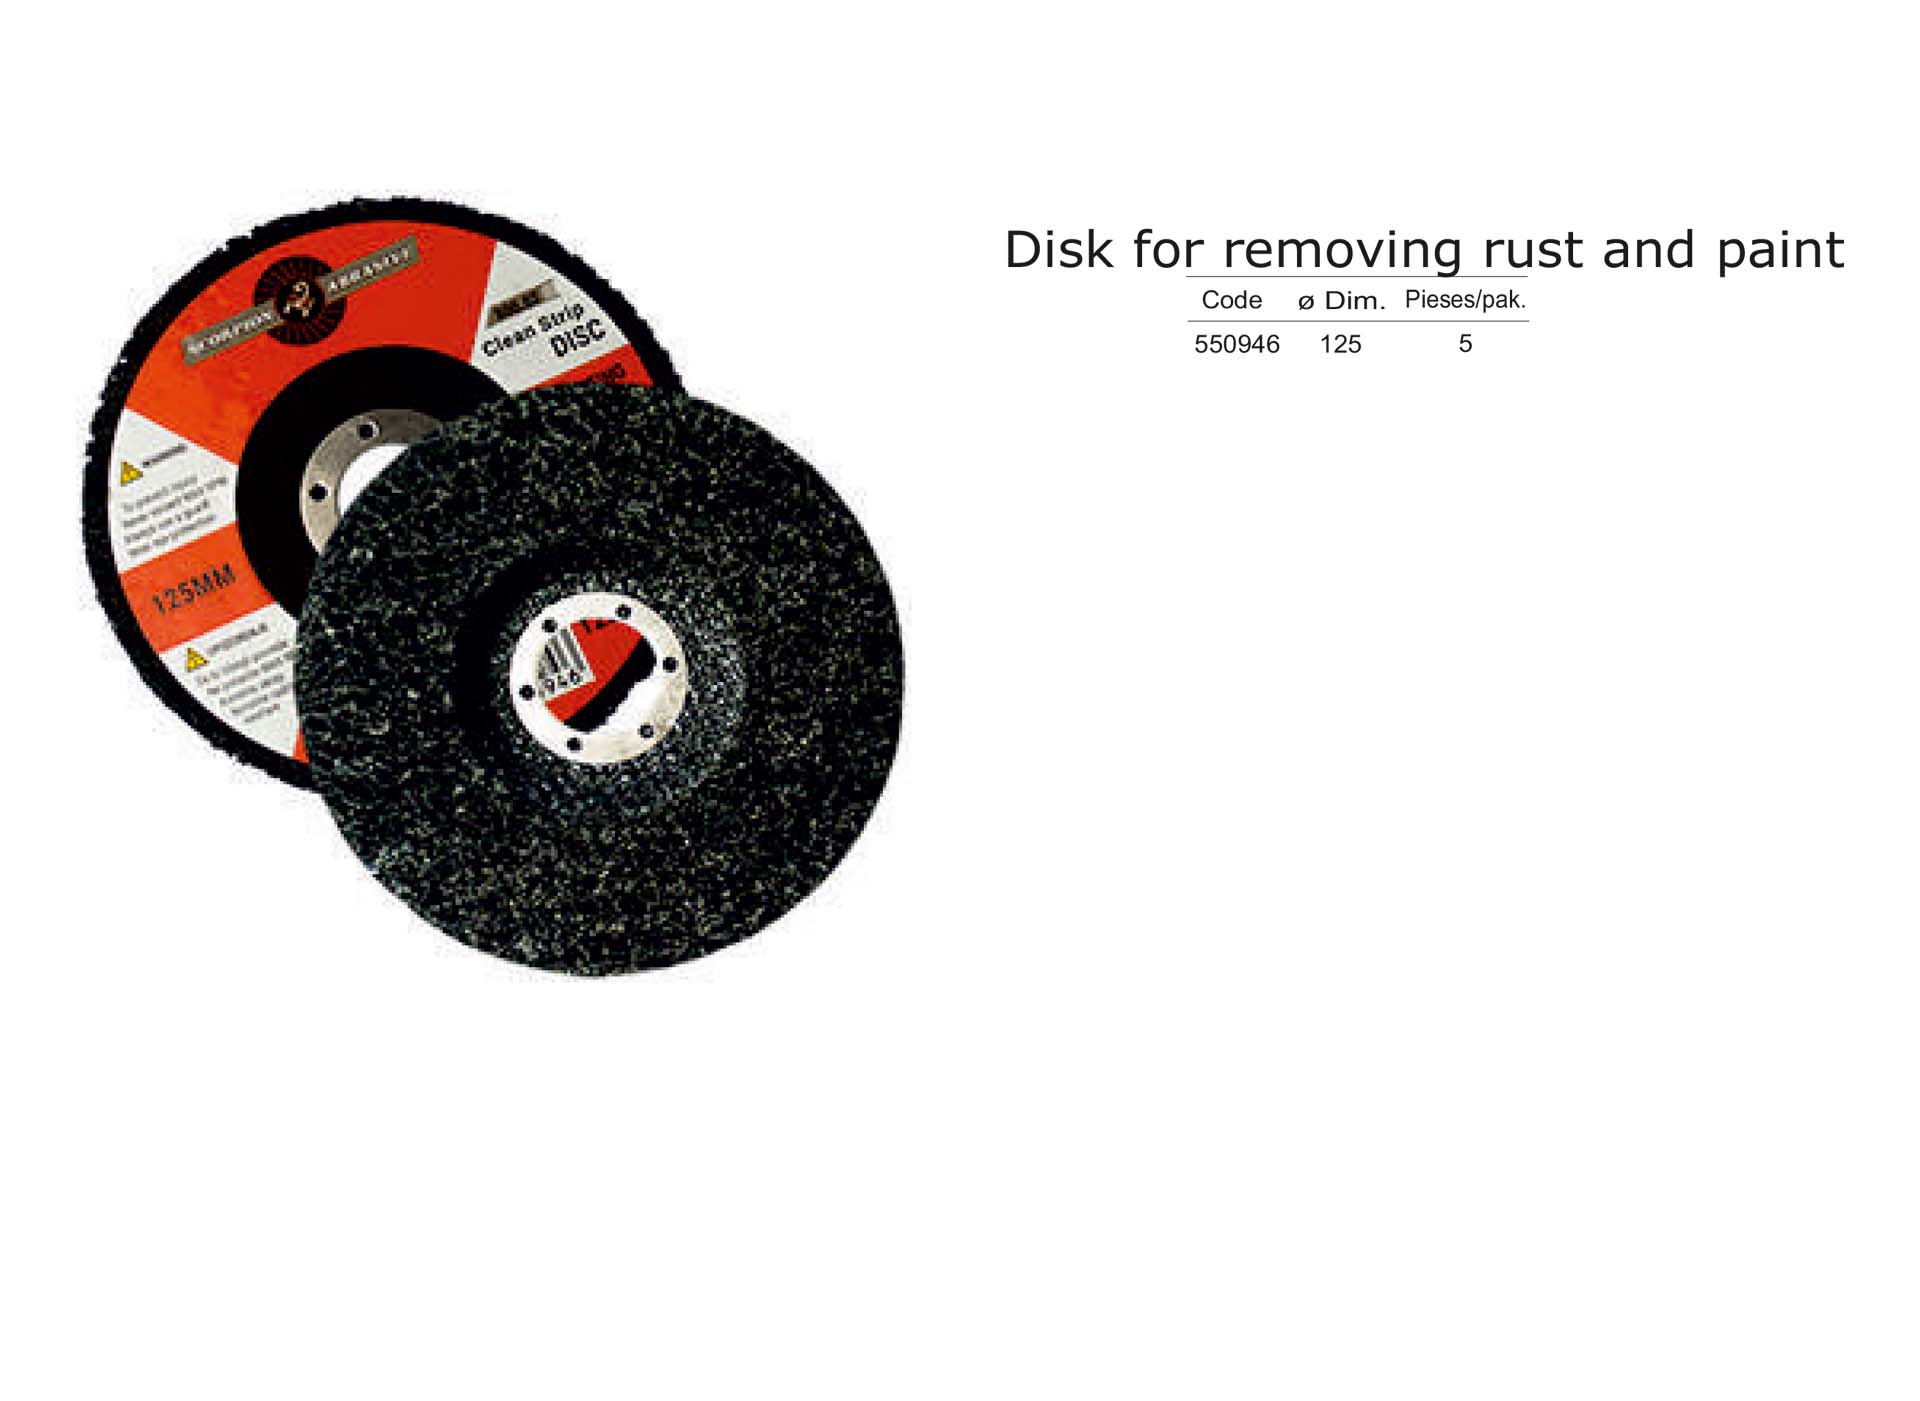 Disk for removing rust and paint